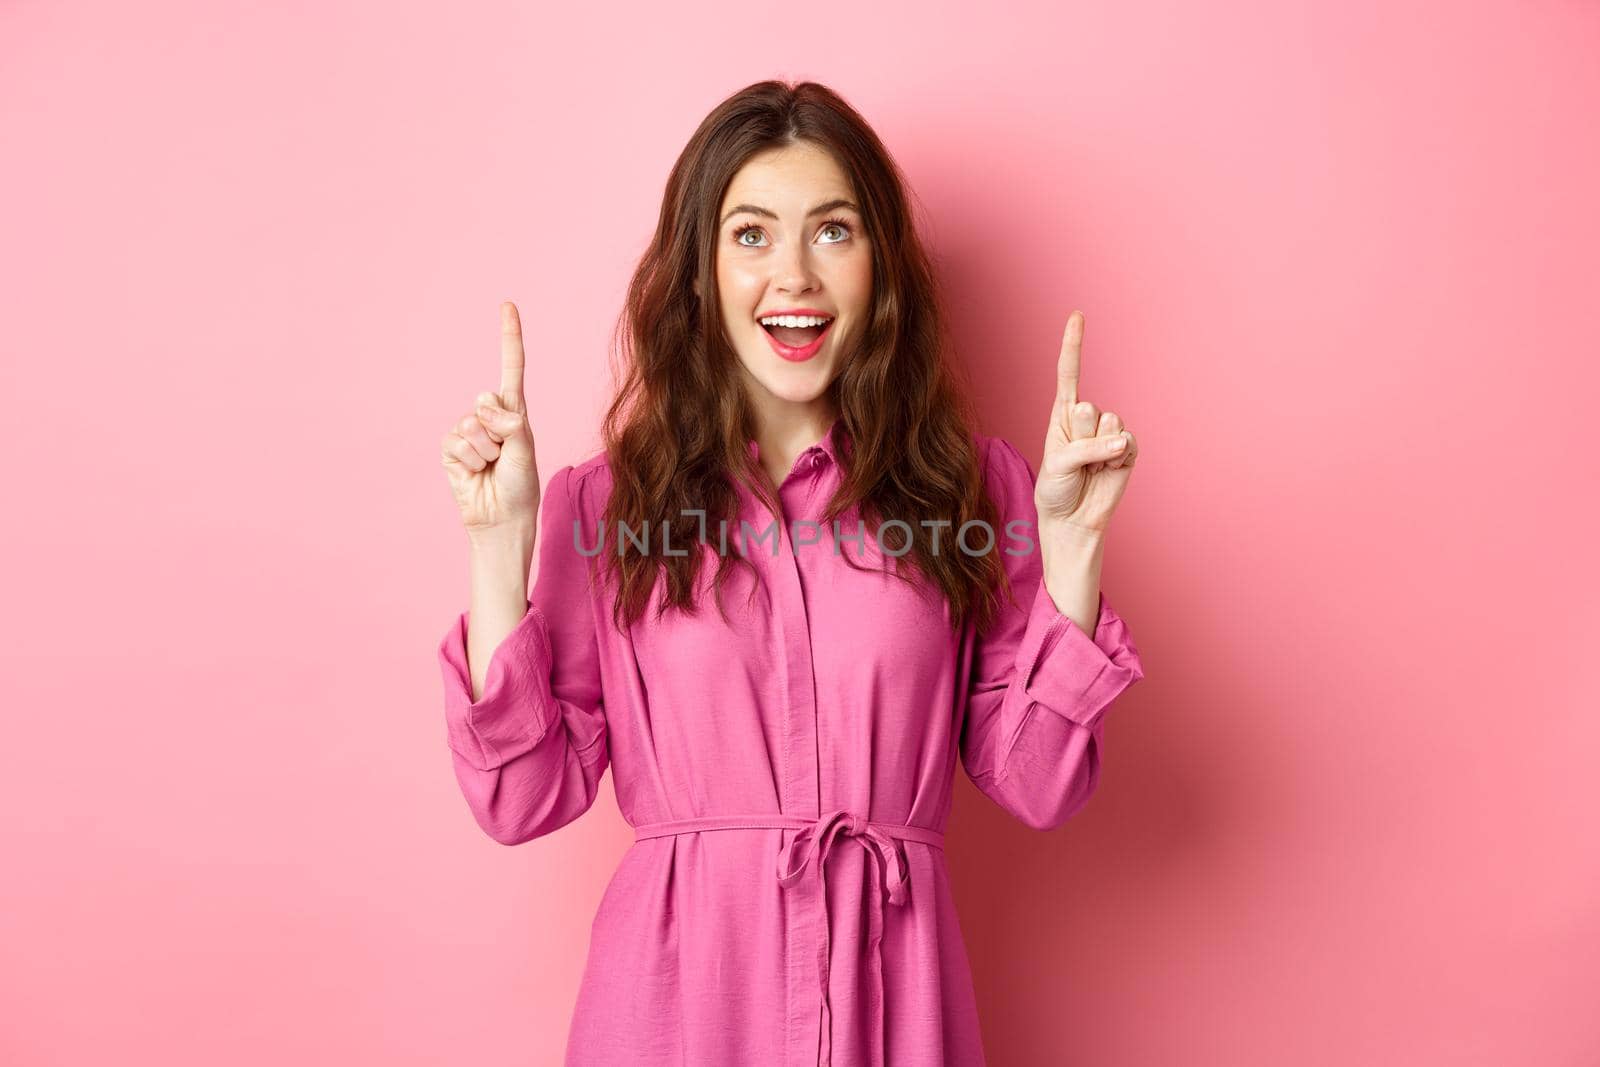 Beauty and fashion. Happy woman looking with amazement at copy space on top, pointing fingers up, smiling amazed, checking out promo offer, standing over pink background.